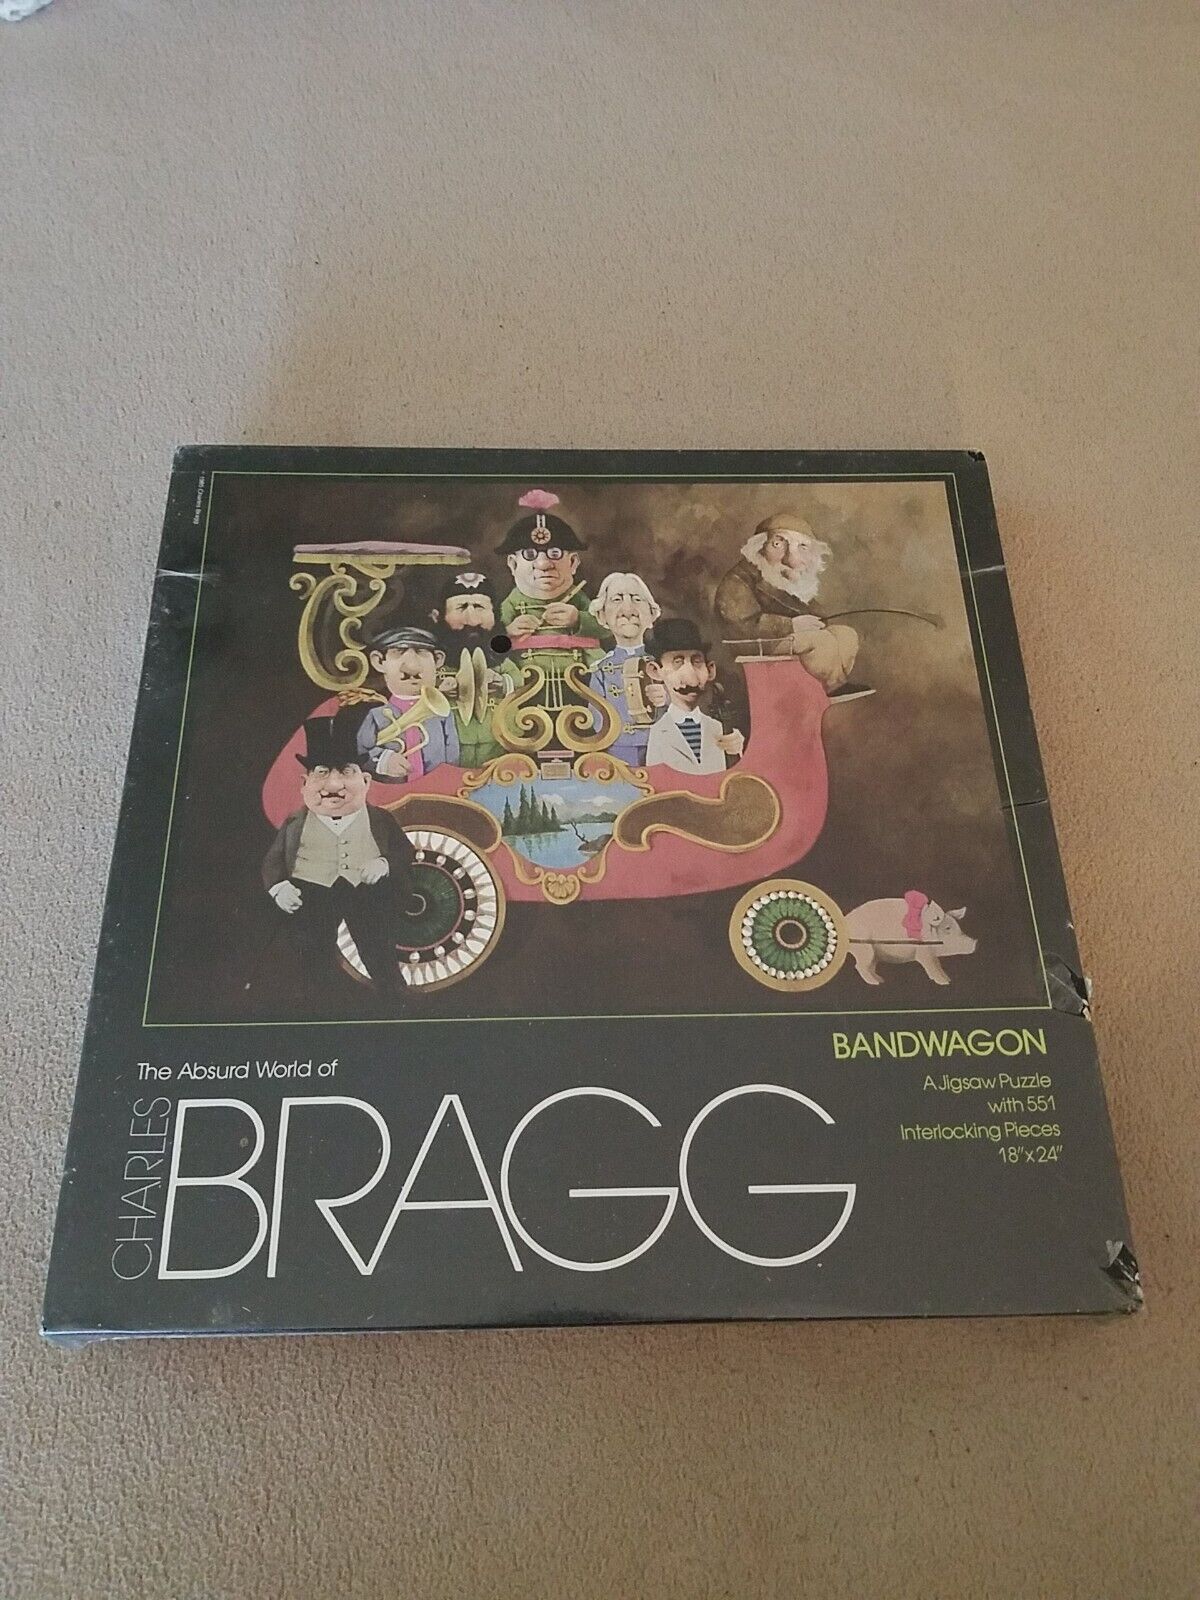 NEW ©1985 The Absurd World of CHARLES BRAGG Bandwagon A Jigsaw Puzzle 551 Piece